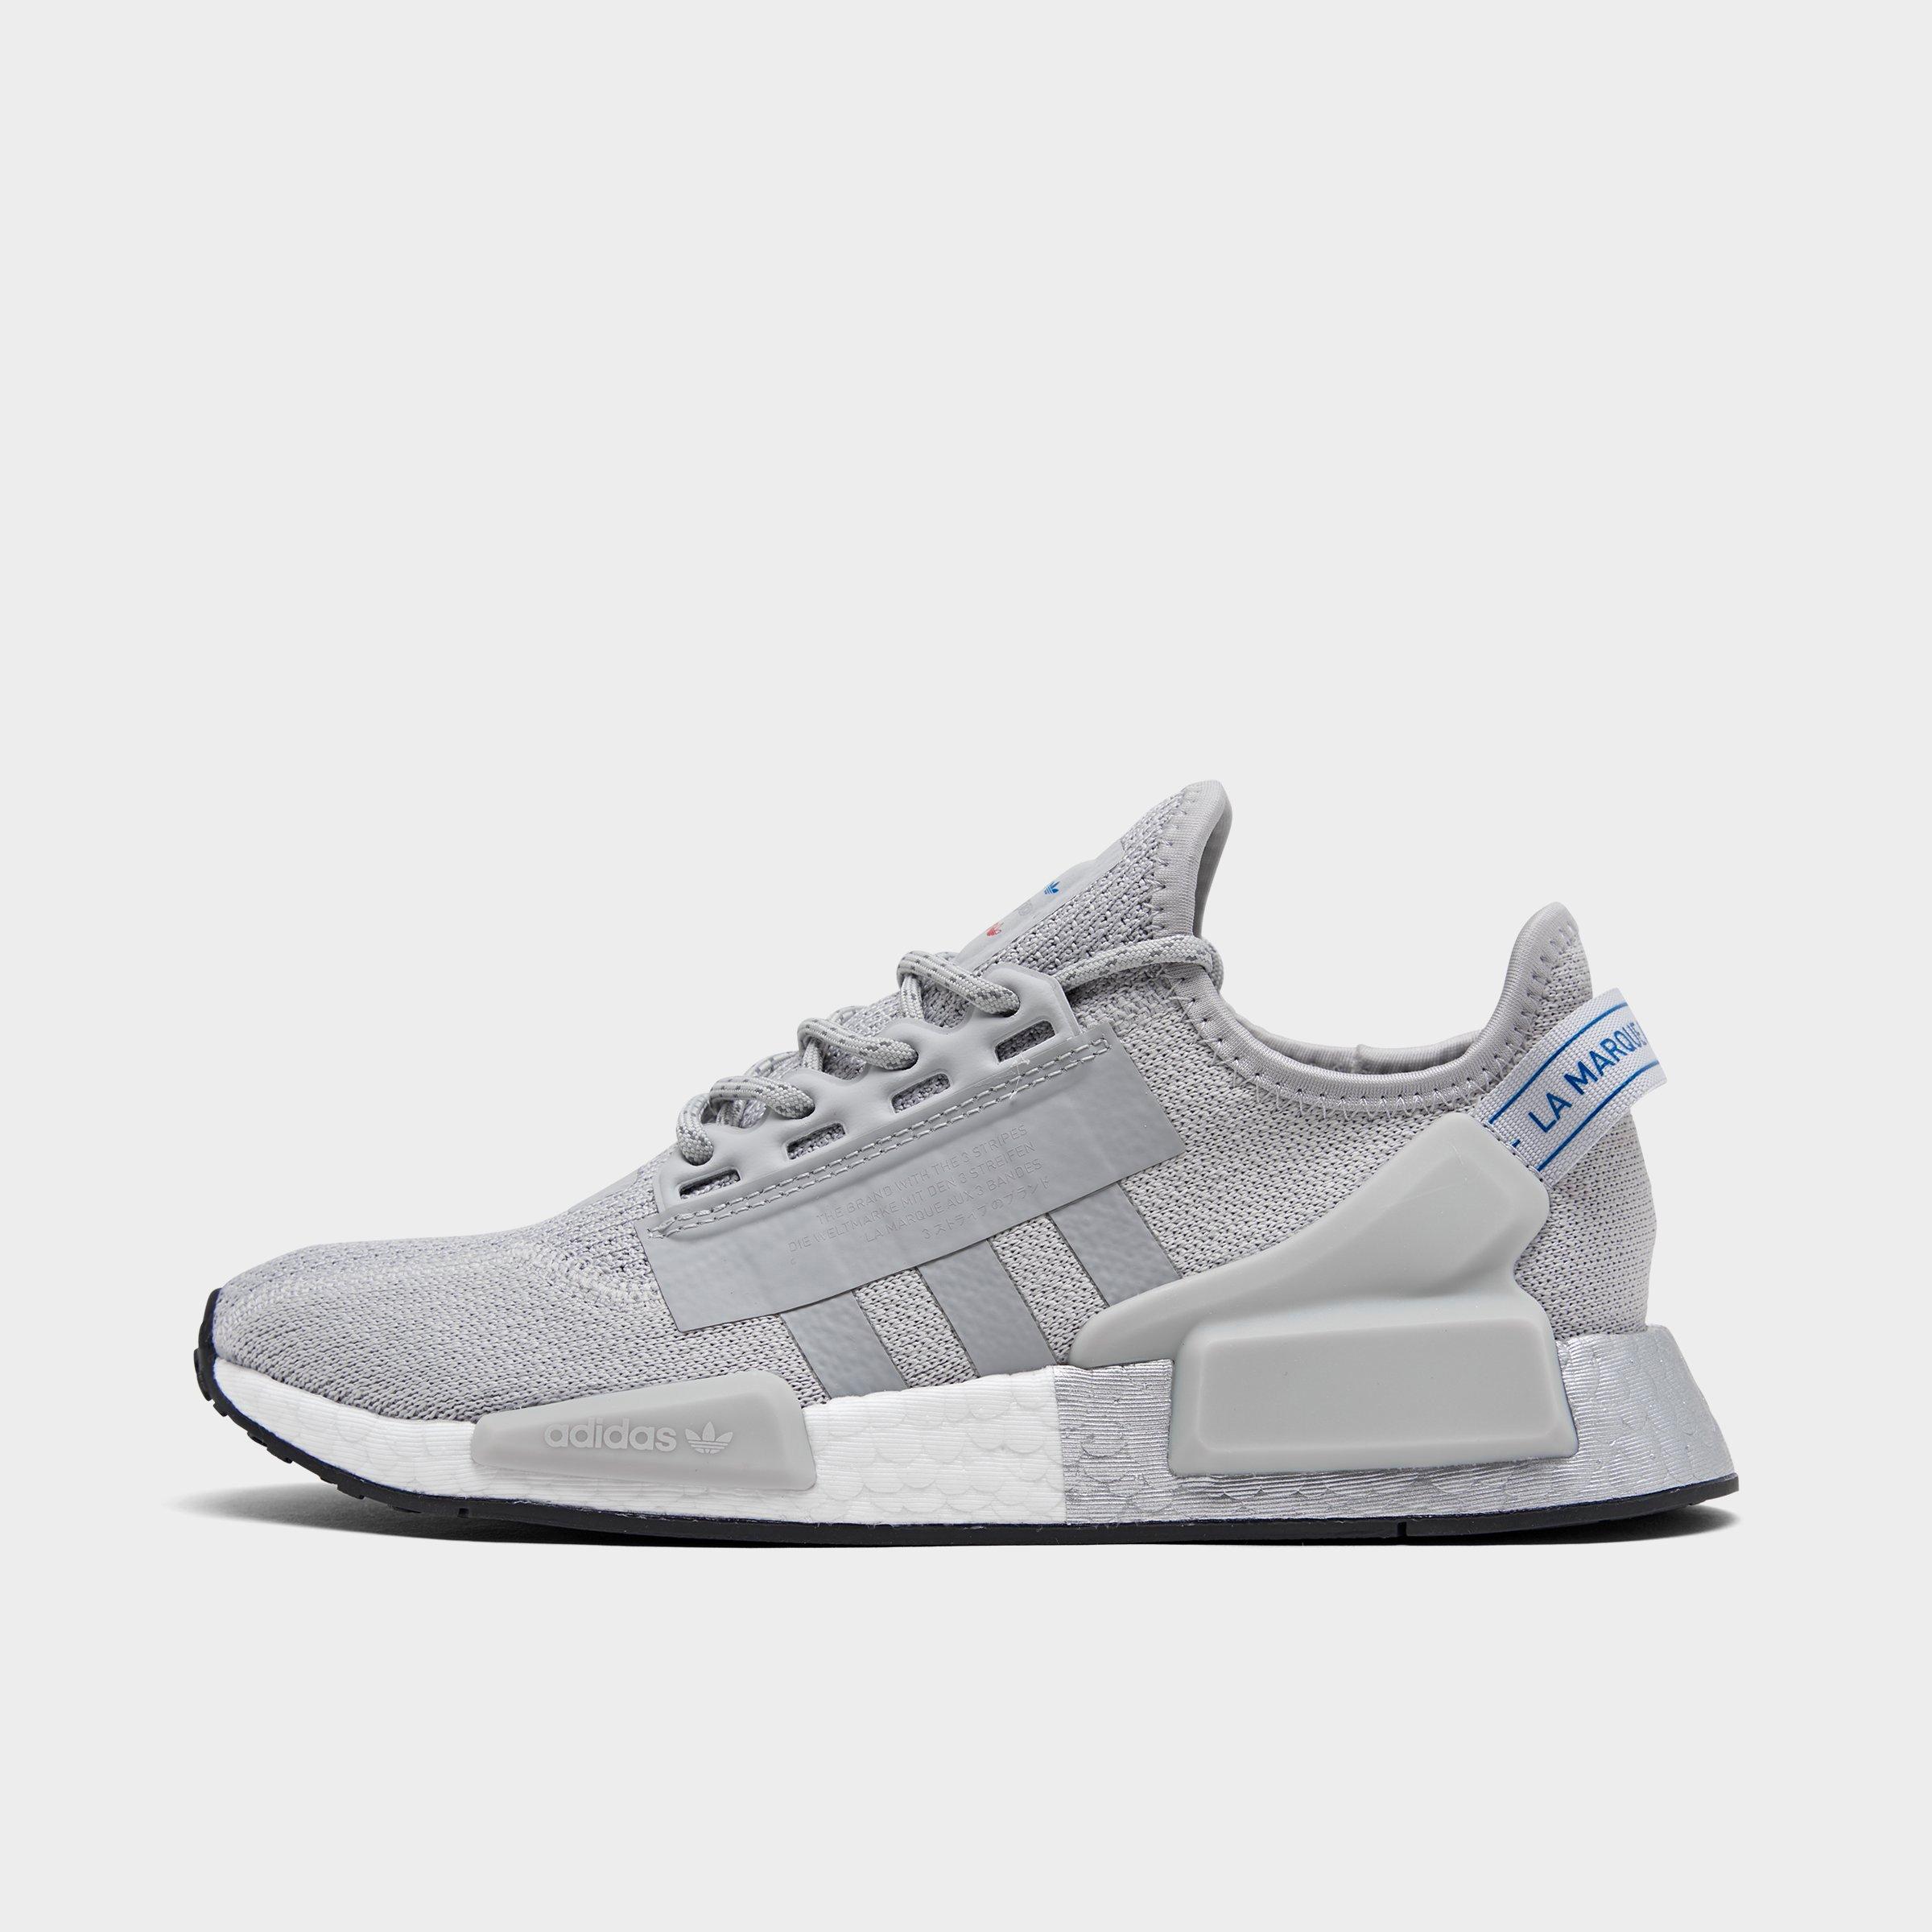 Adidas NMD R1 Silver Metallic and White Shoes adidas US